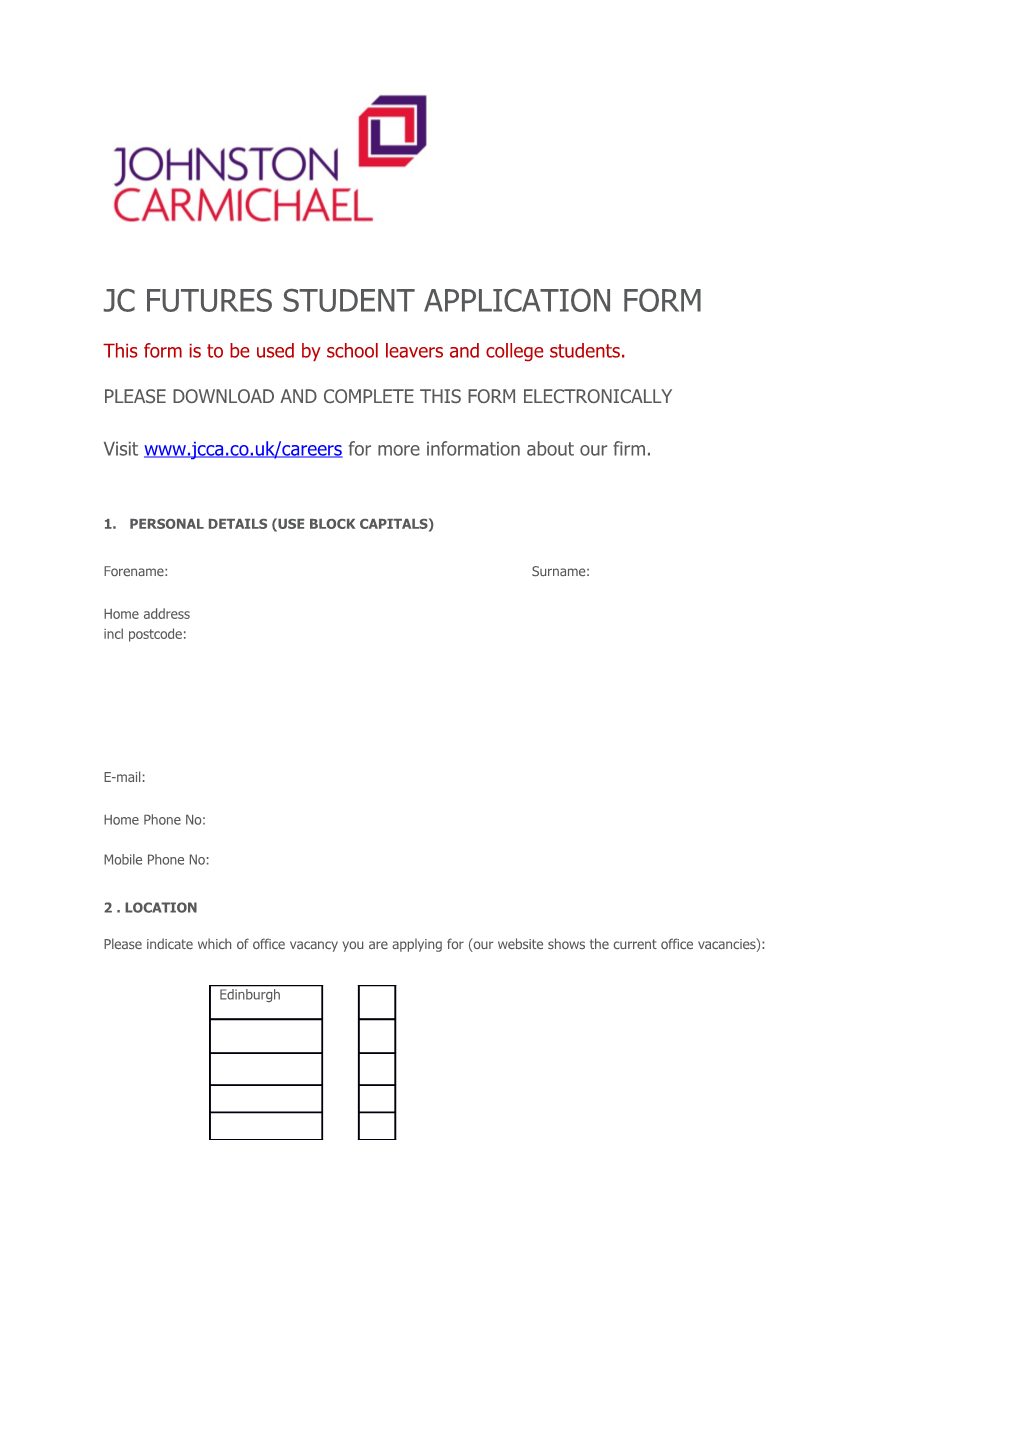 This Form Is to Be Used by School Leavers and College Students